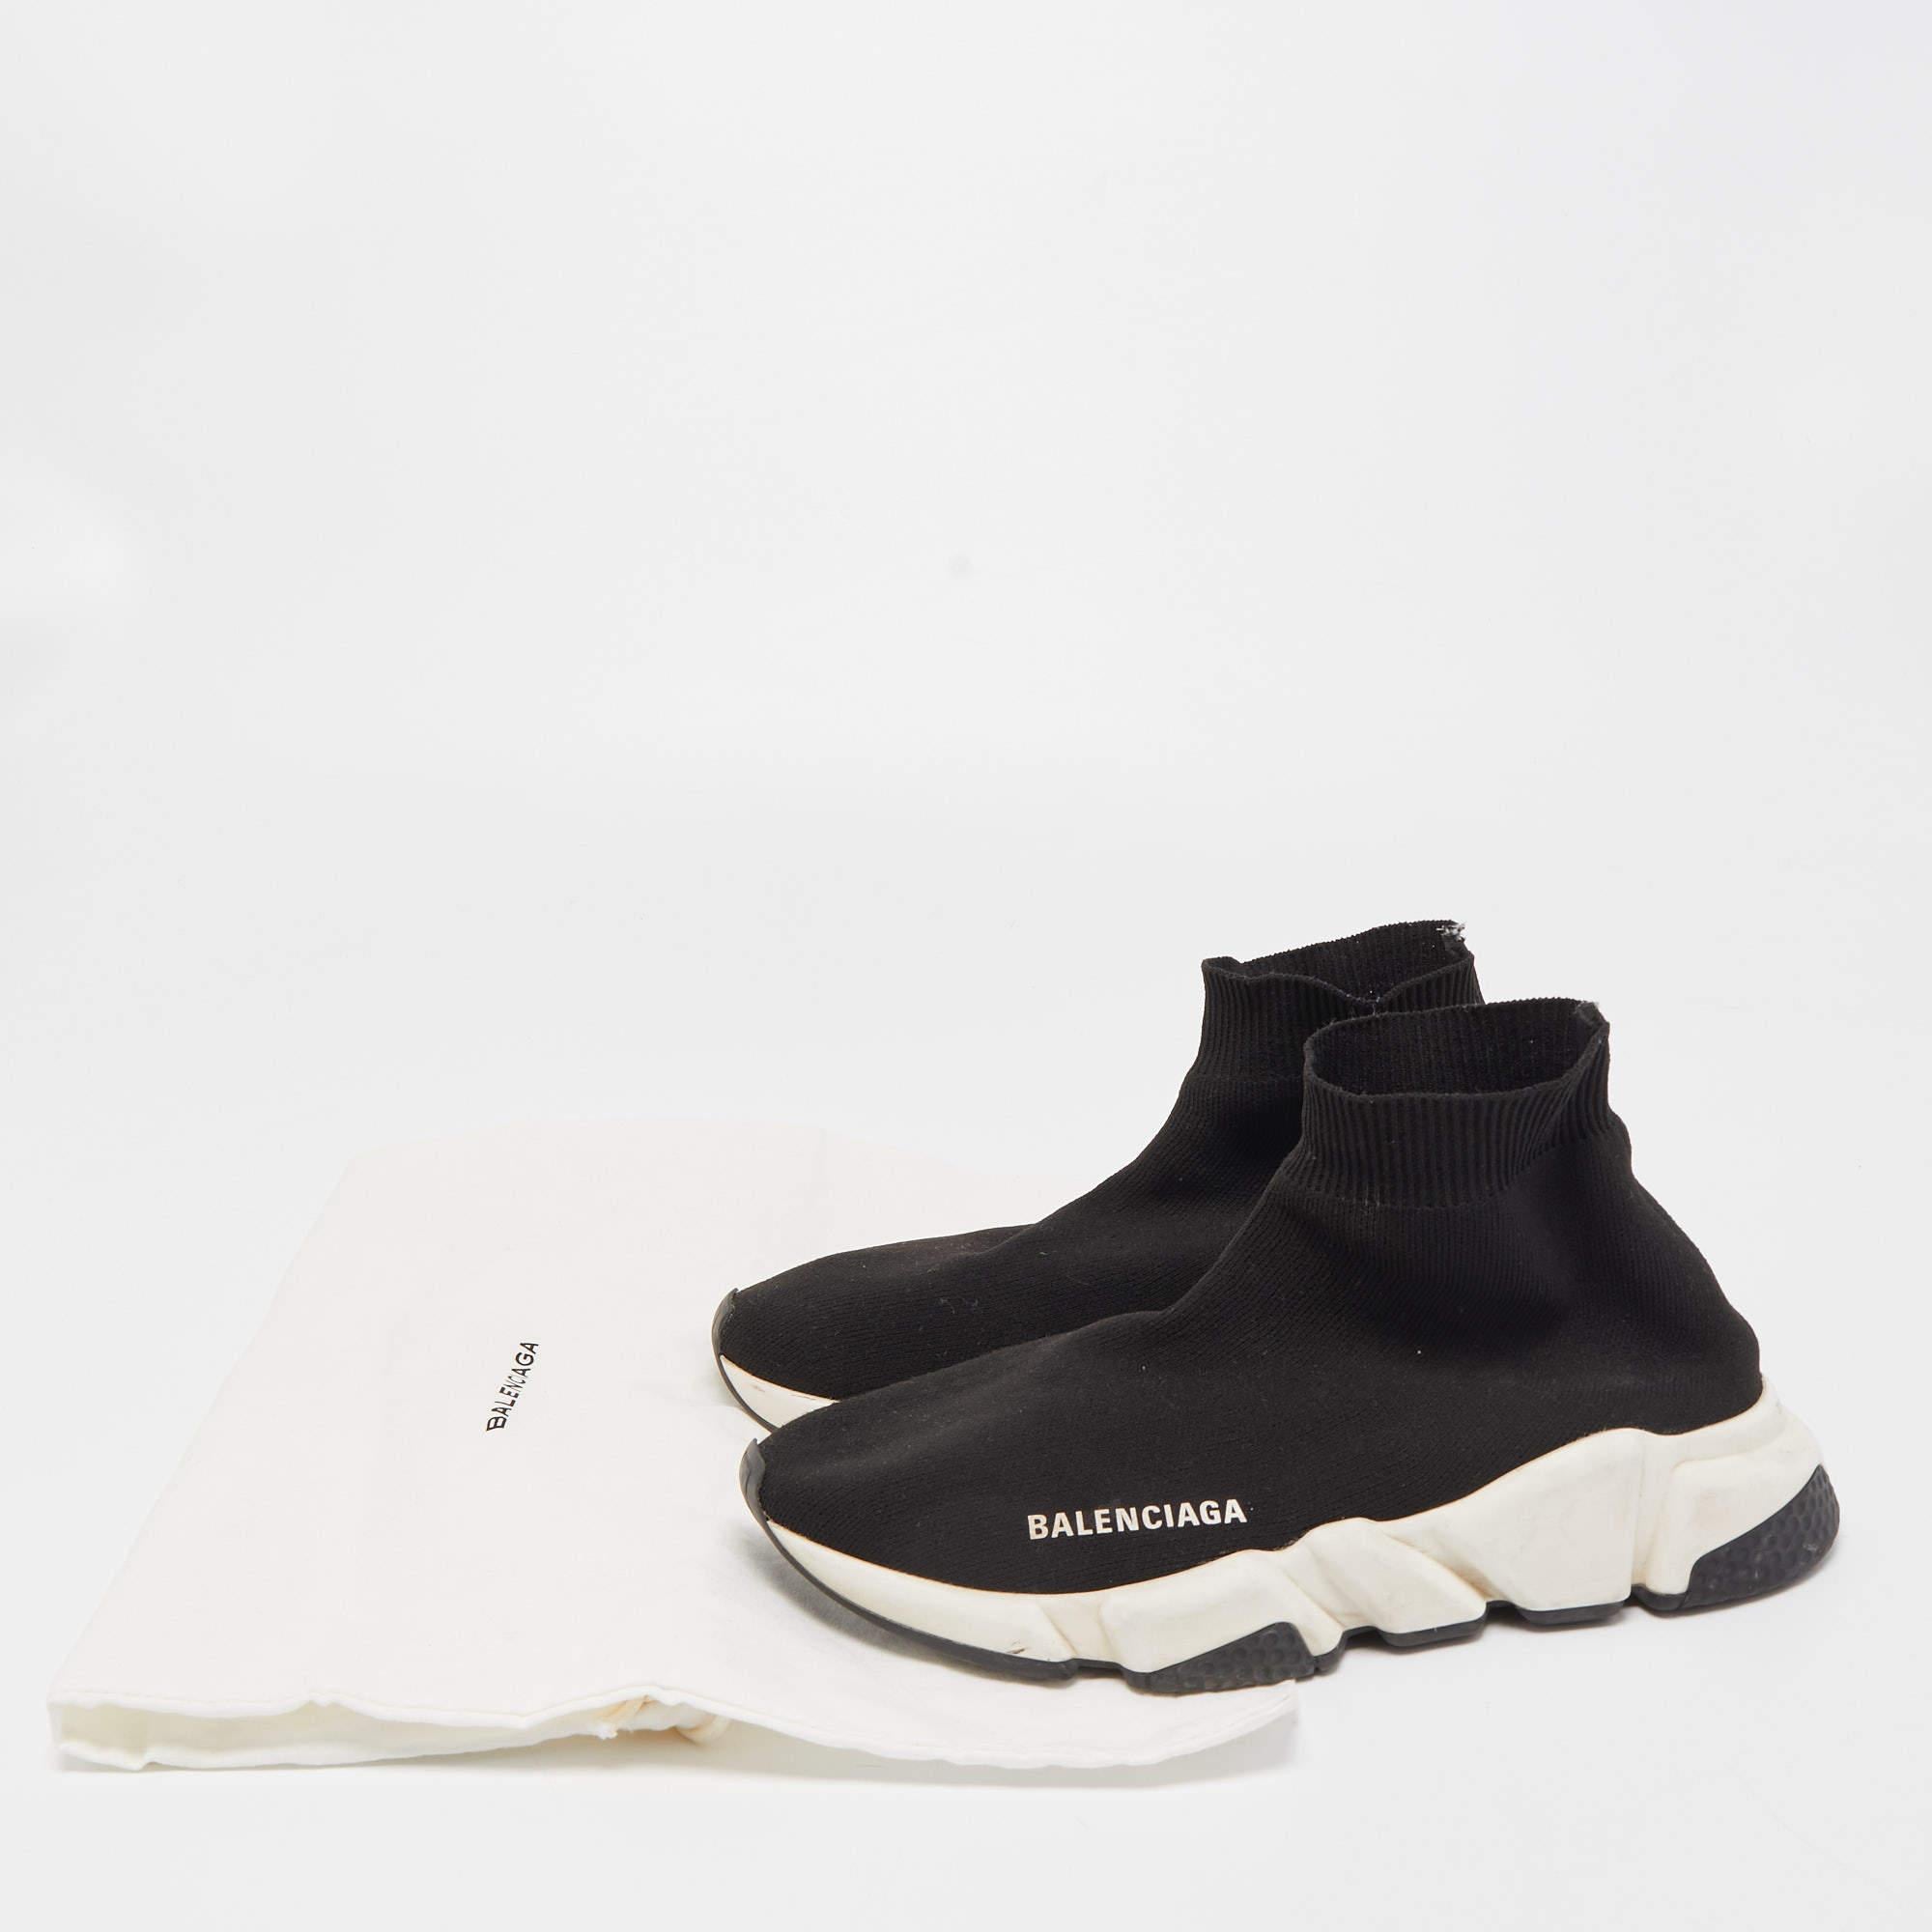 Balenciaga Black Knit Fabric Speed Trainer Sneakers Size 37 6